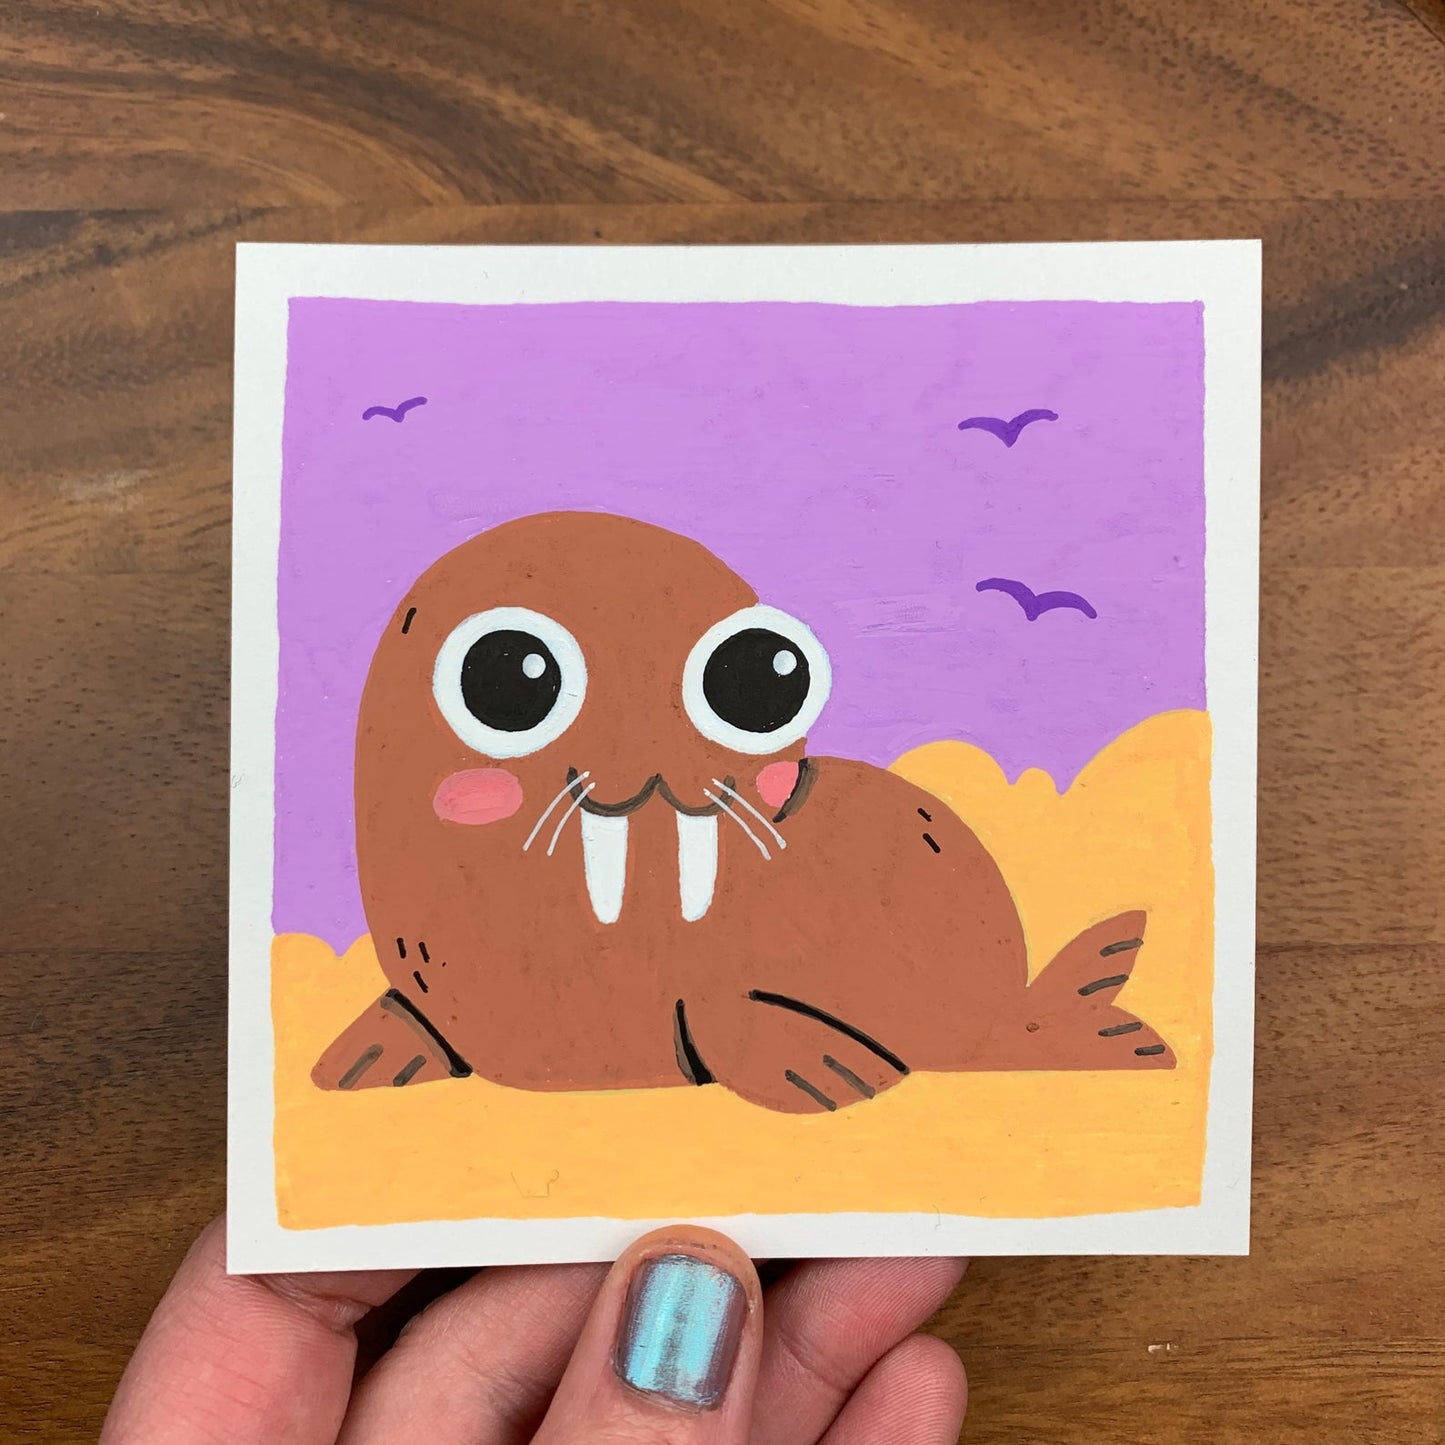 Original artwork of a cute walrus on a beach with a purple sky and seagulls in the background. Materials used: Uni-Posca paint markers.